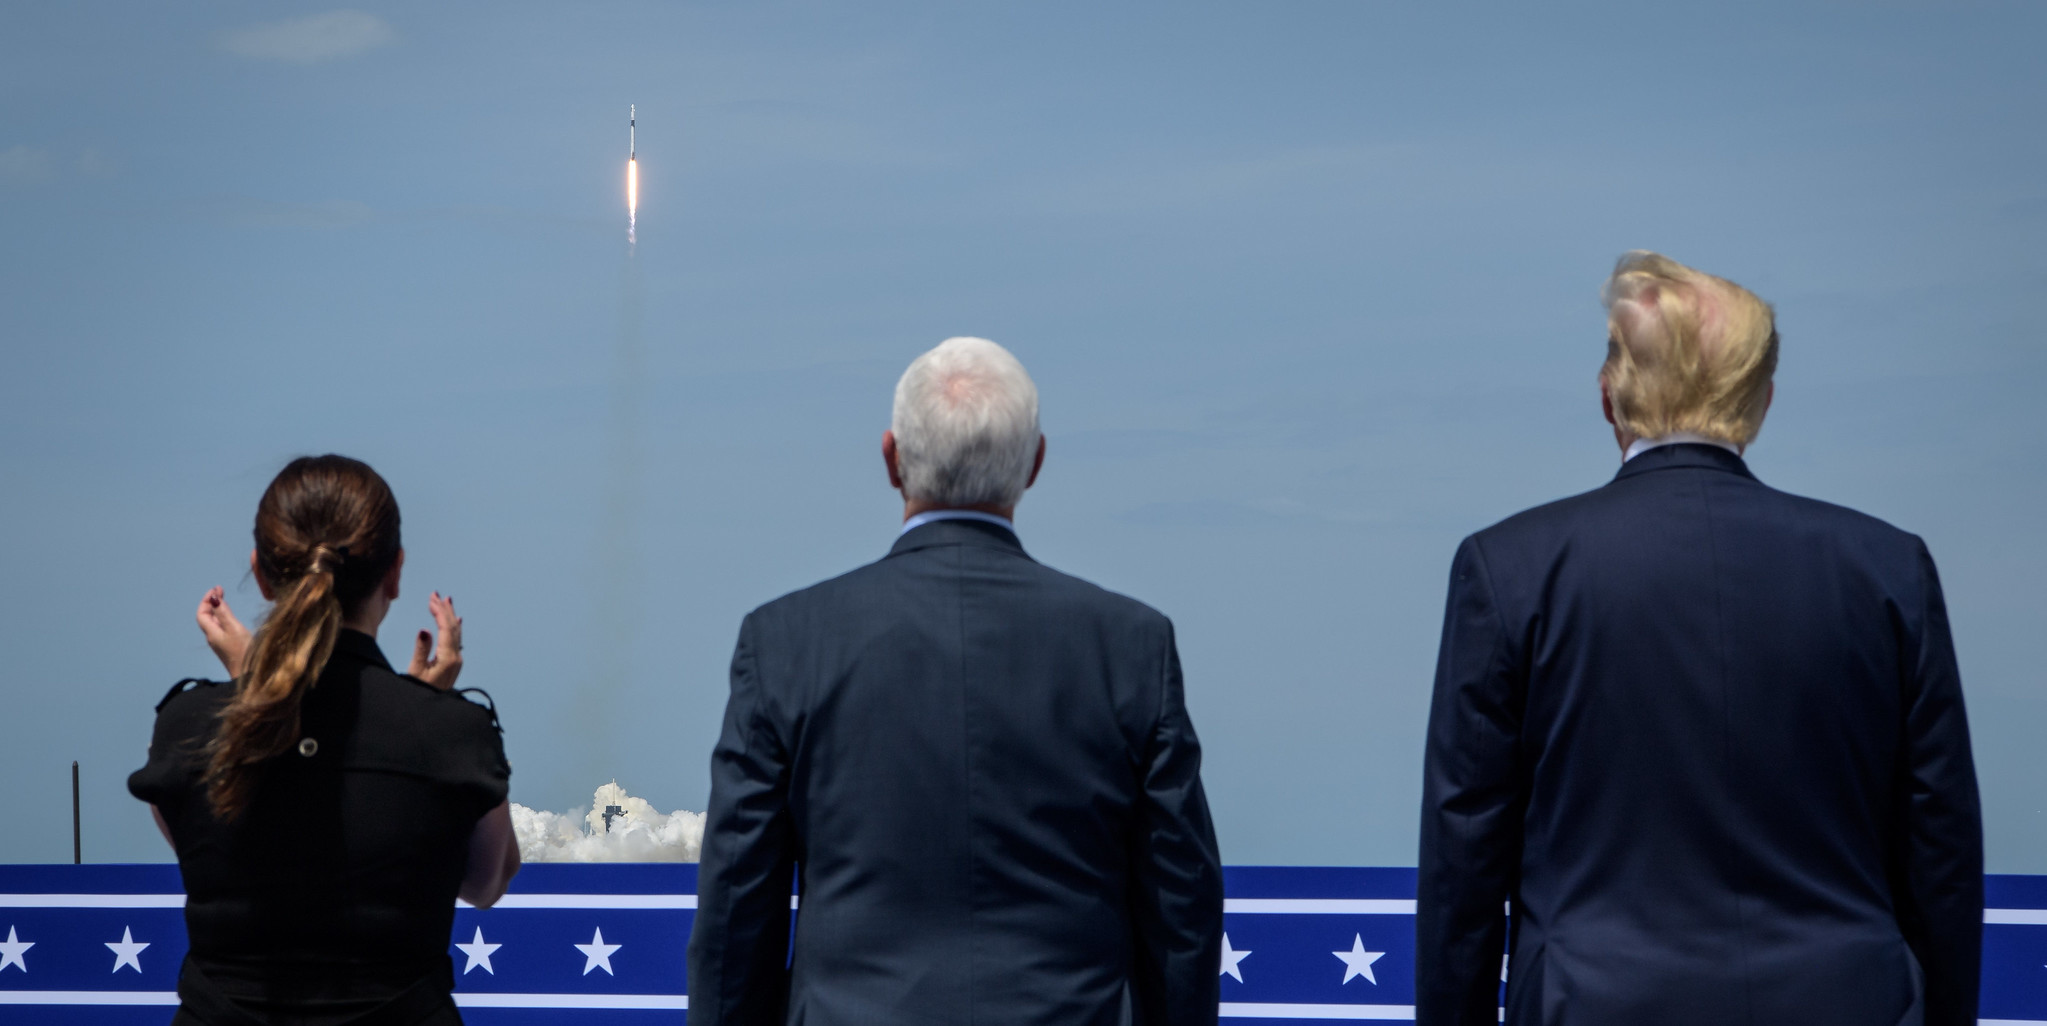 President Donald Trump, right, Vice President Mike Pence, and Second Lady Karen Pence watch the launch of a SpaceX Falcon 9 .